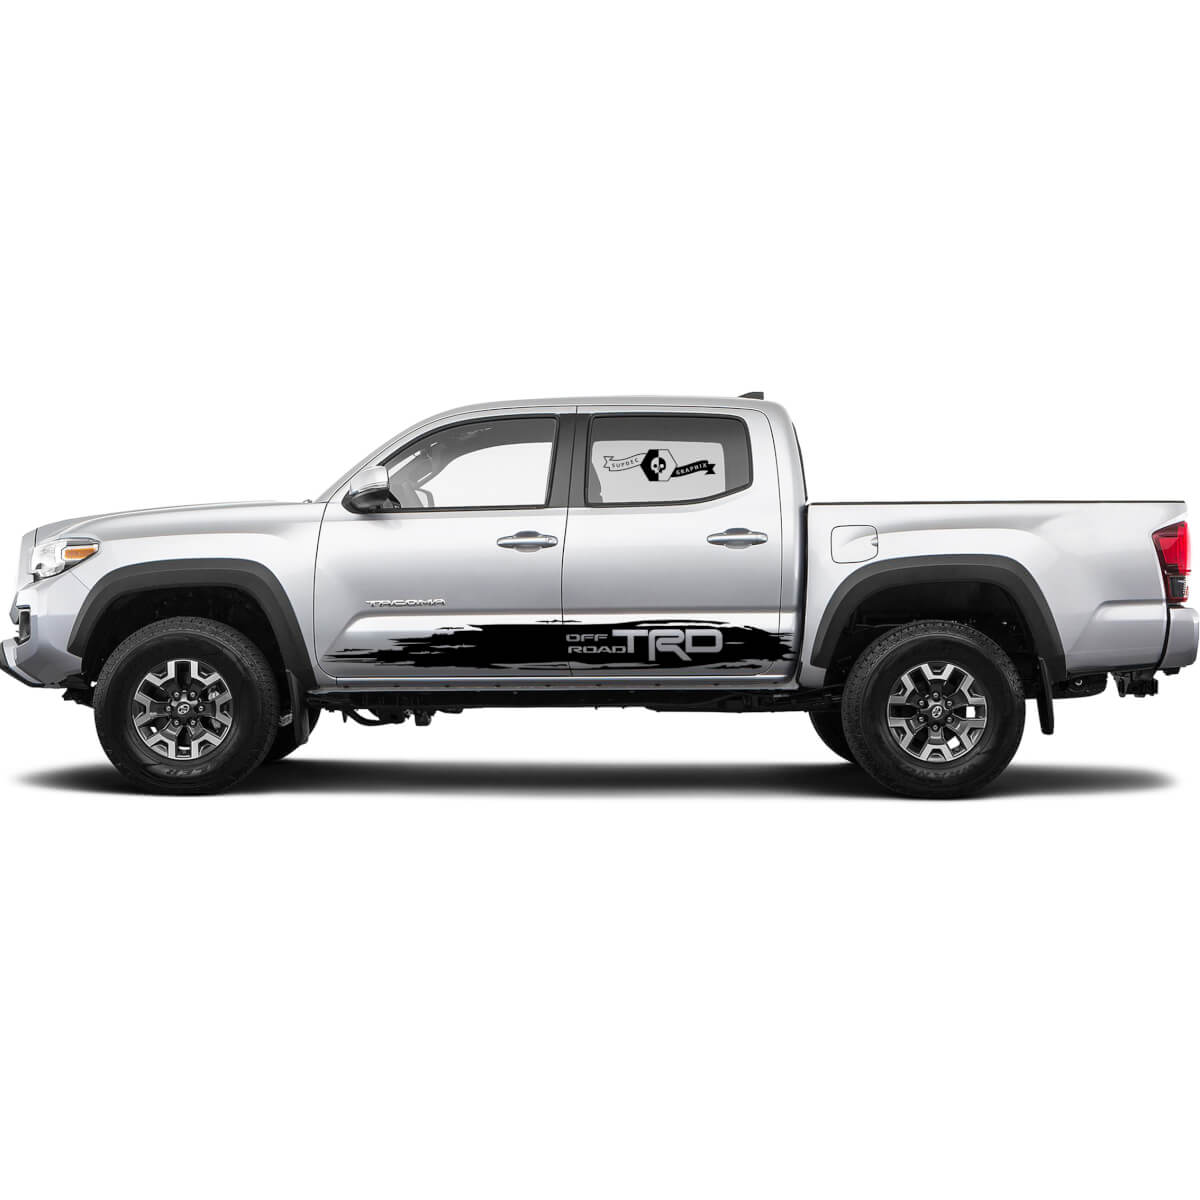 TRD Toyota Racing Splash Stripes for Truck Doors Panel Decals Stickers for Tacoma FJ Cruiser Tundra Hilux 4Runner